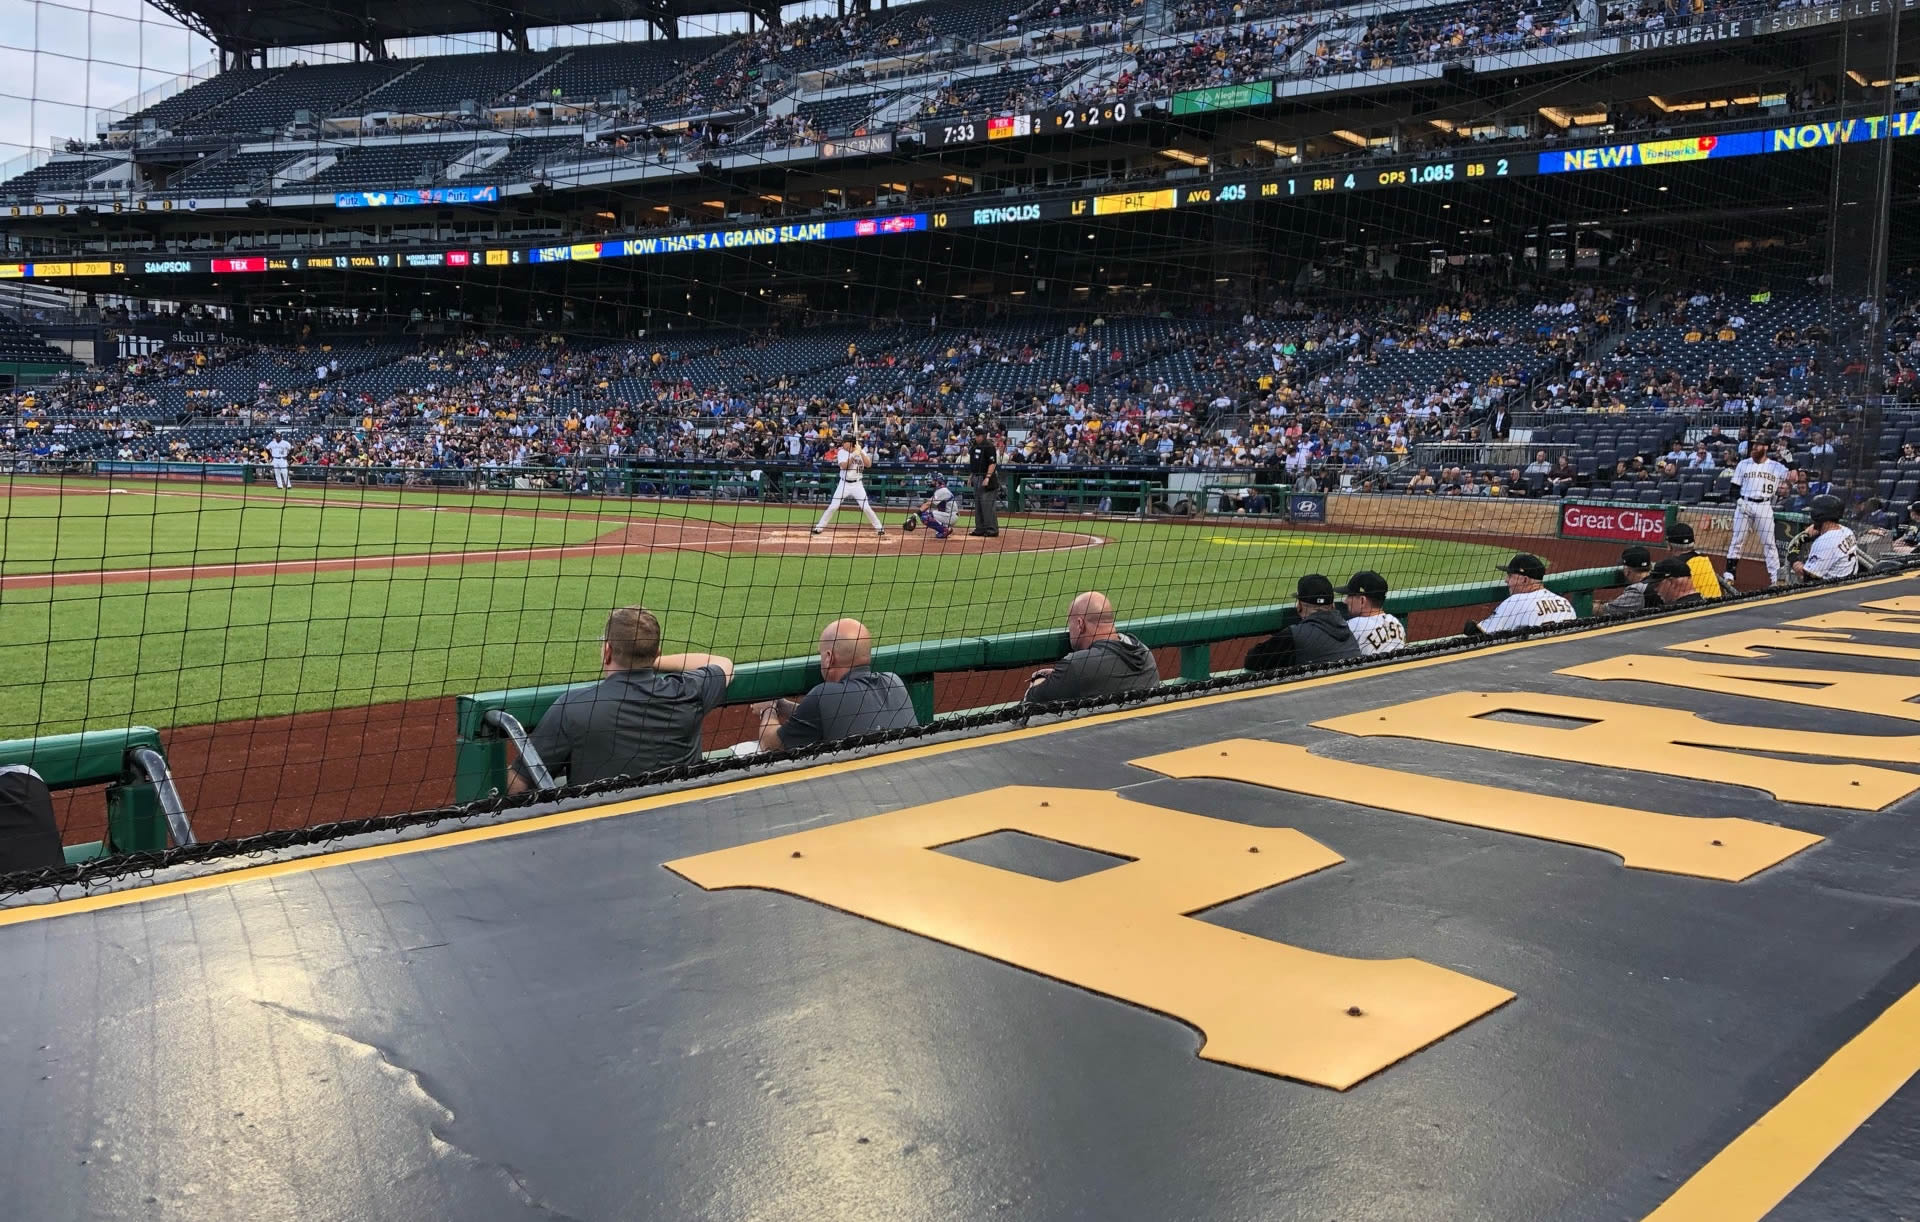 PNC Park, Pittsburgh PA - Seating Chart View